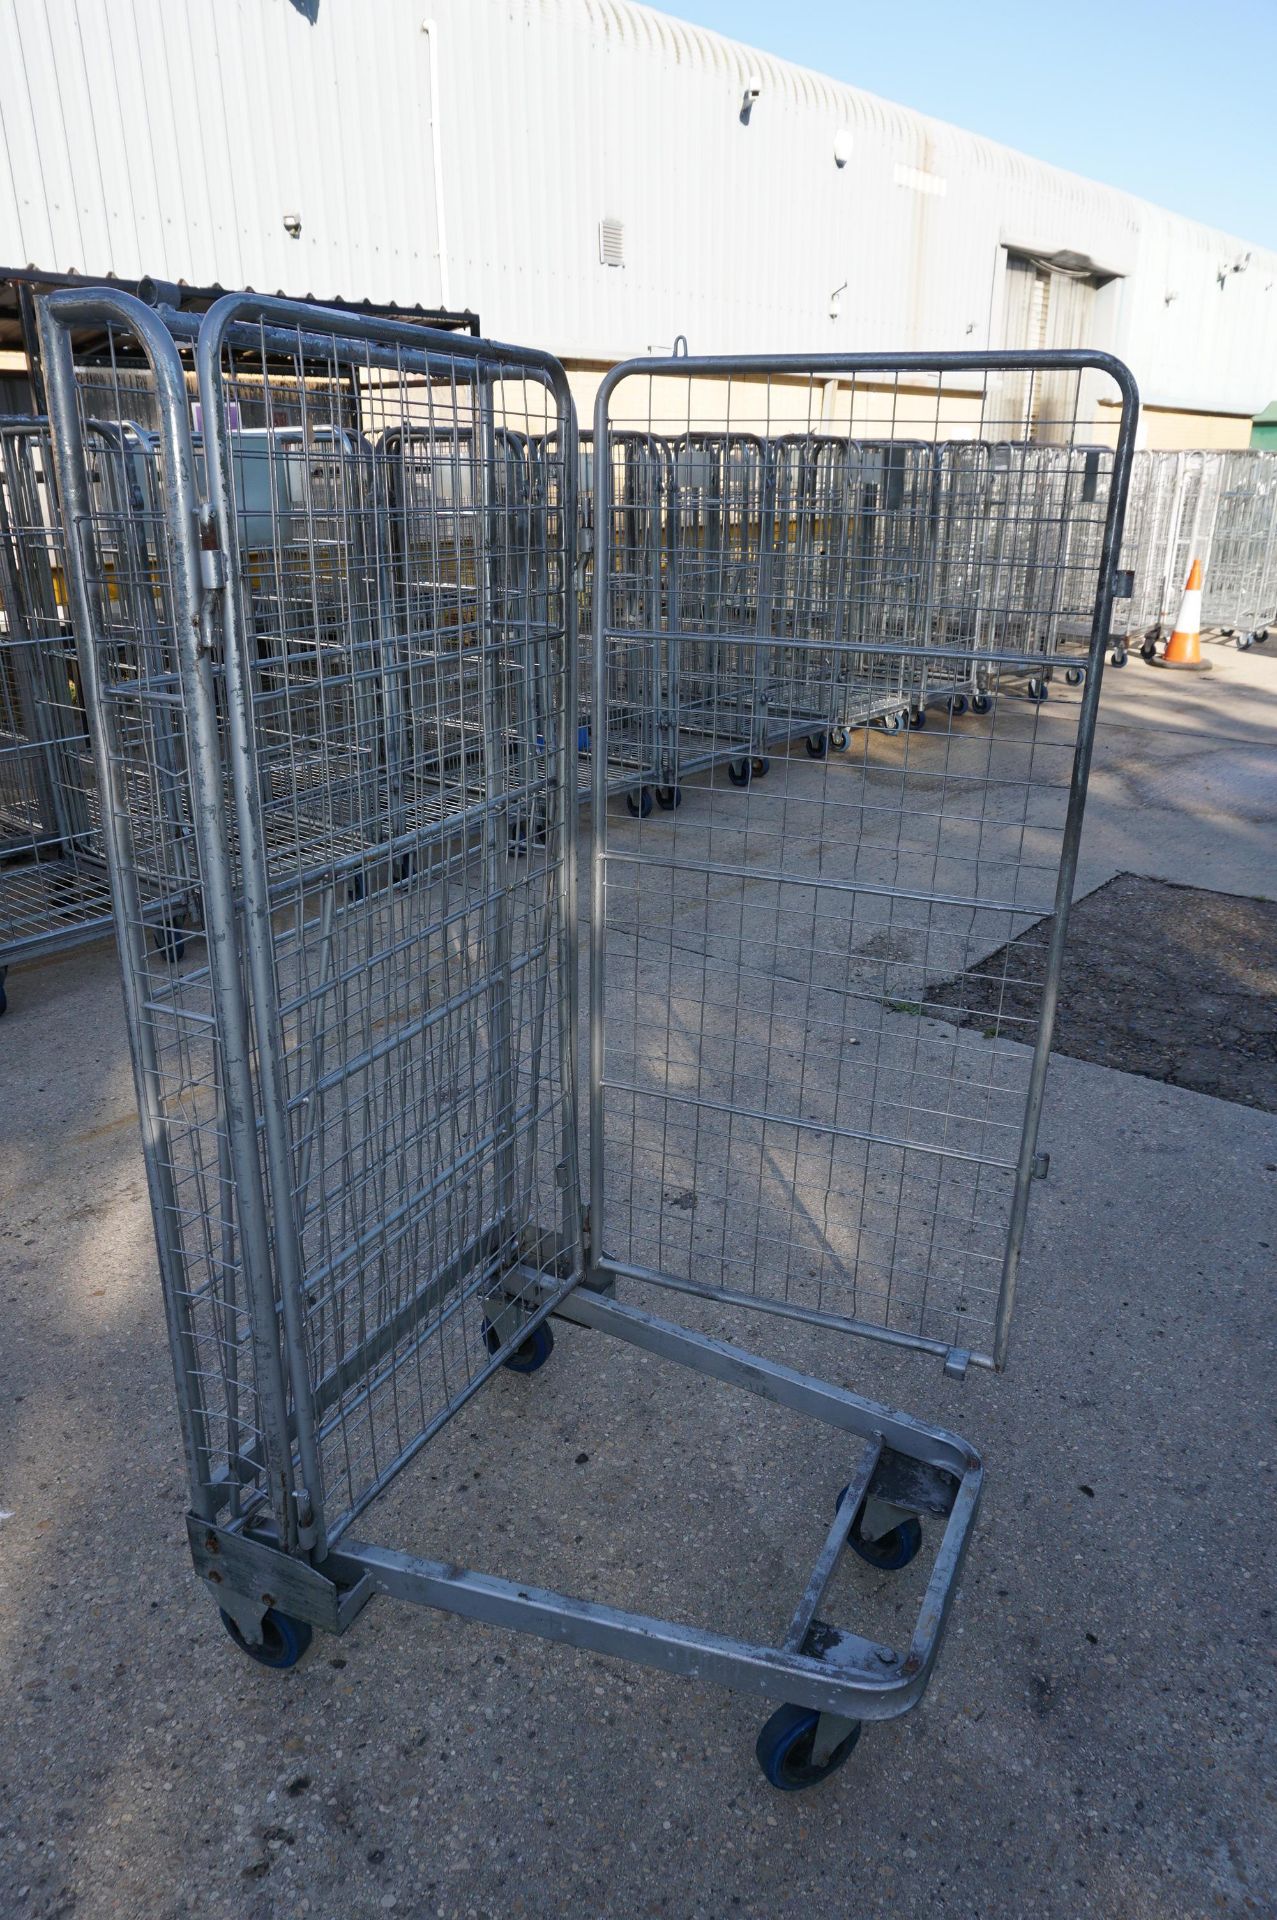 30 x Steel collapsible mobile cages - Image 2 of 3